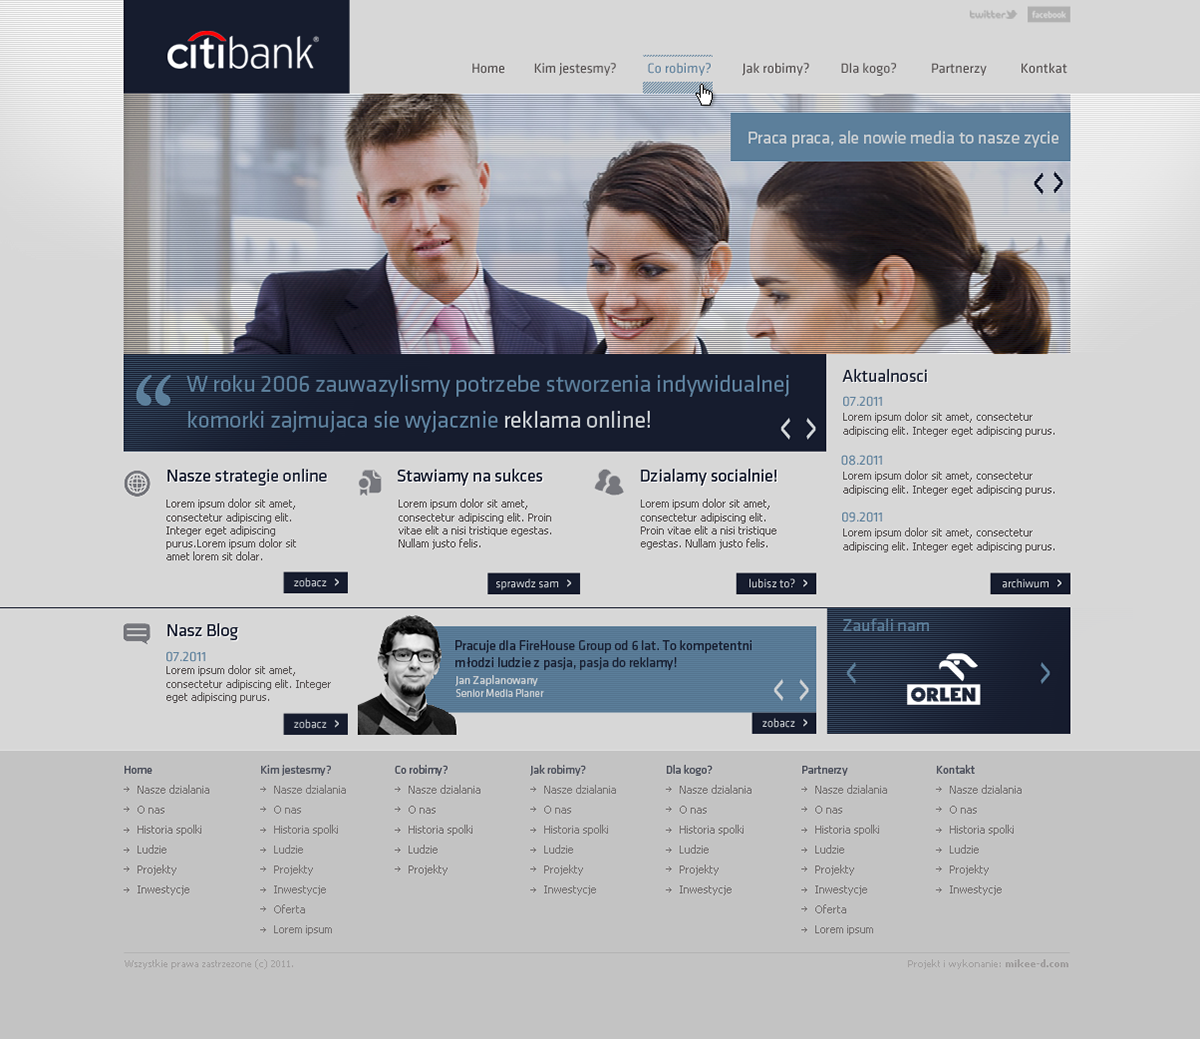 citi Bank advertising and training center Web durys Michal